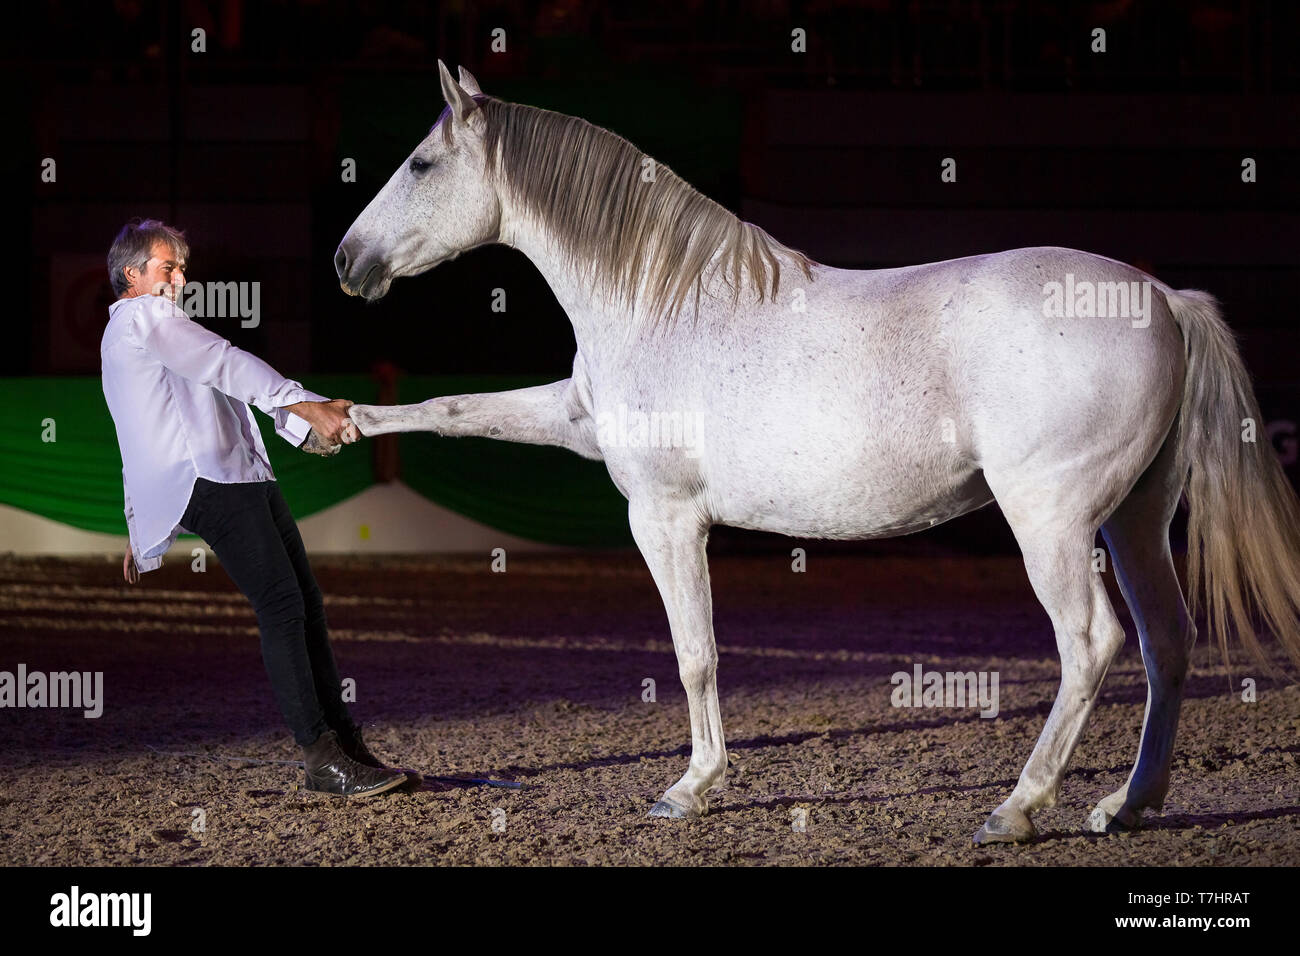 Jean-Francois Pignon showing a liberty dressage with a gray horse Stock  Photo - Alamy